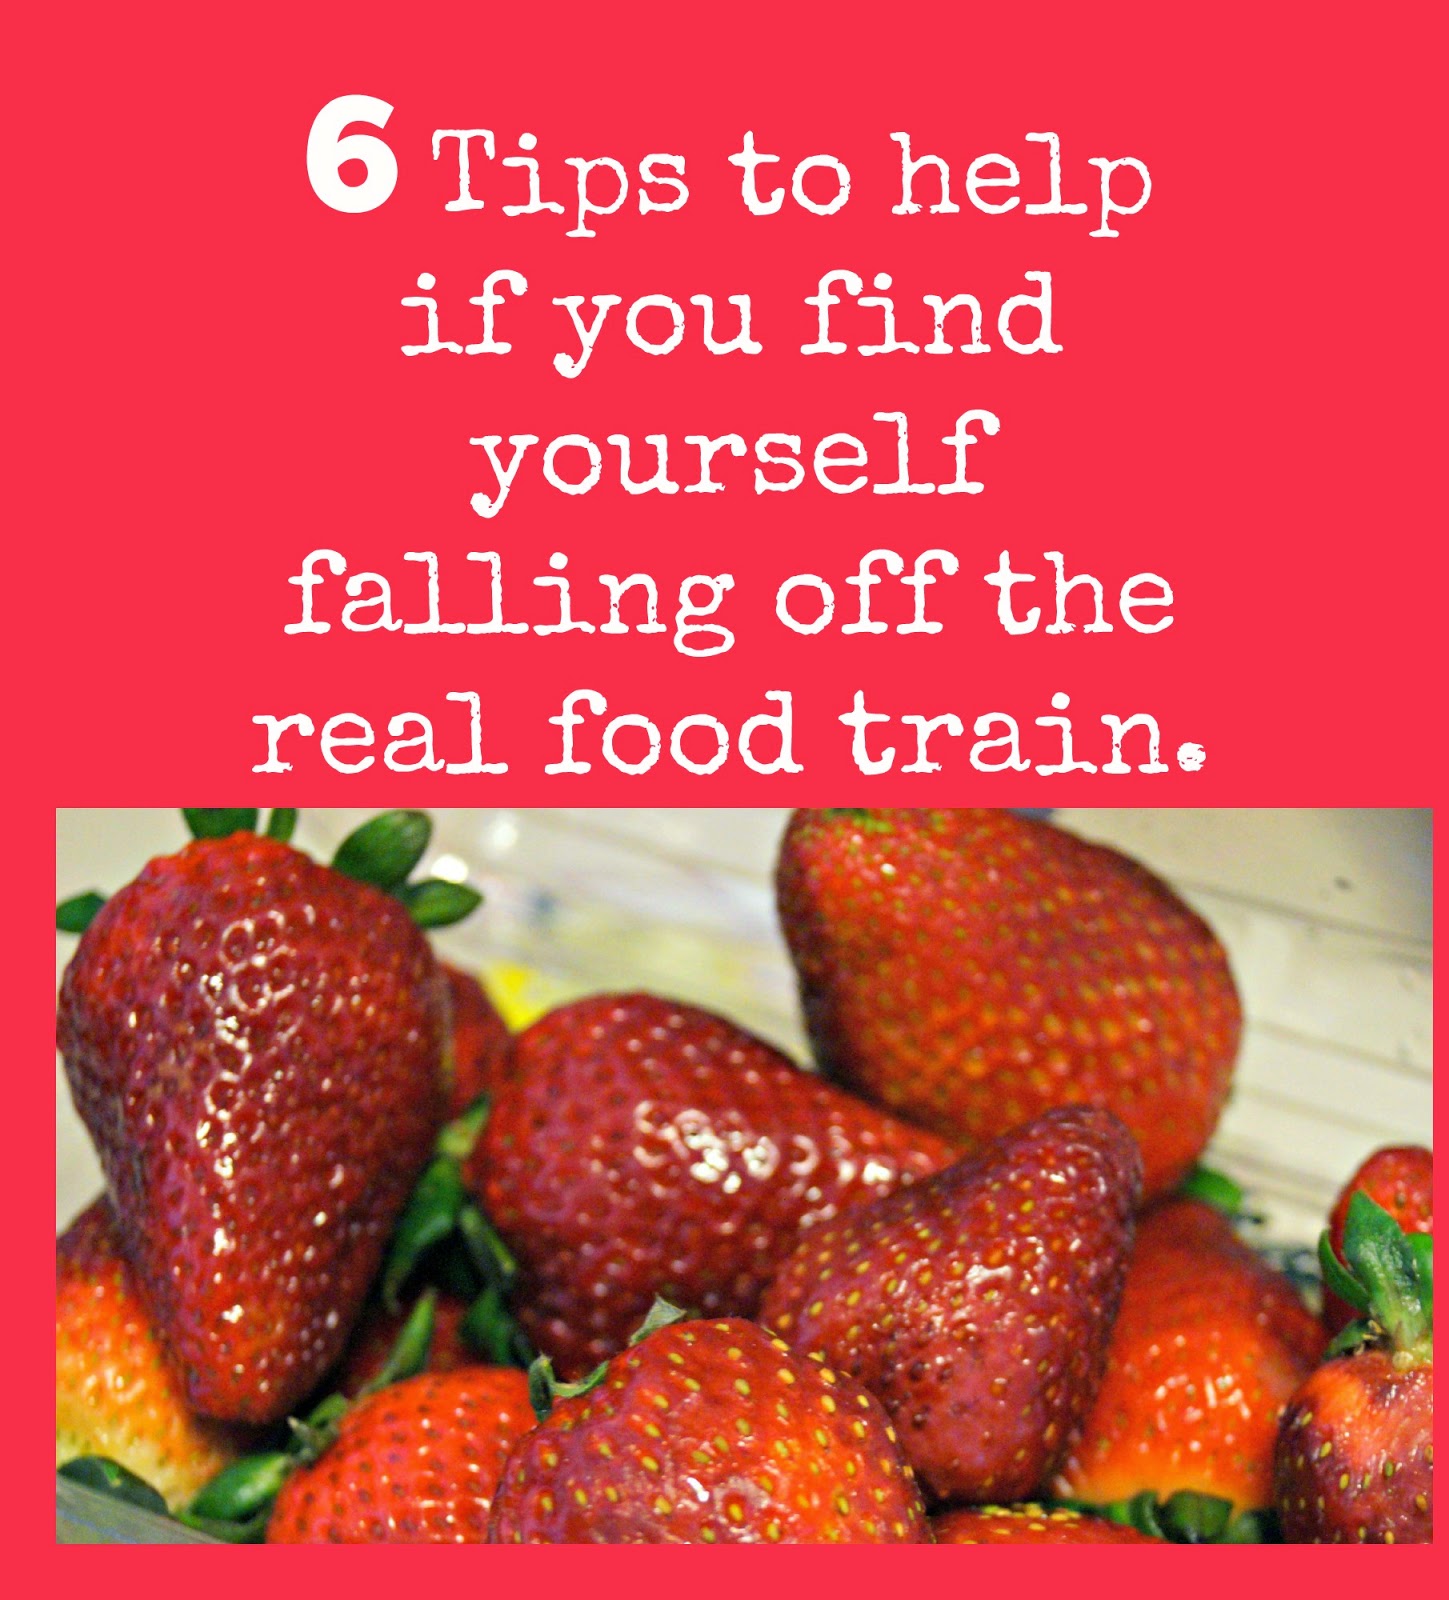 6 Tips to Help If You Find Yourself Falling off the Real Food Train